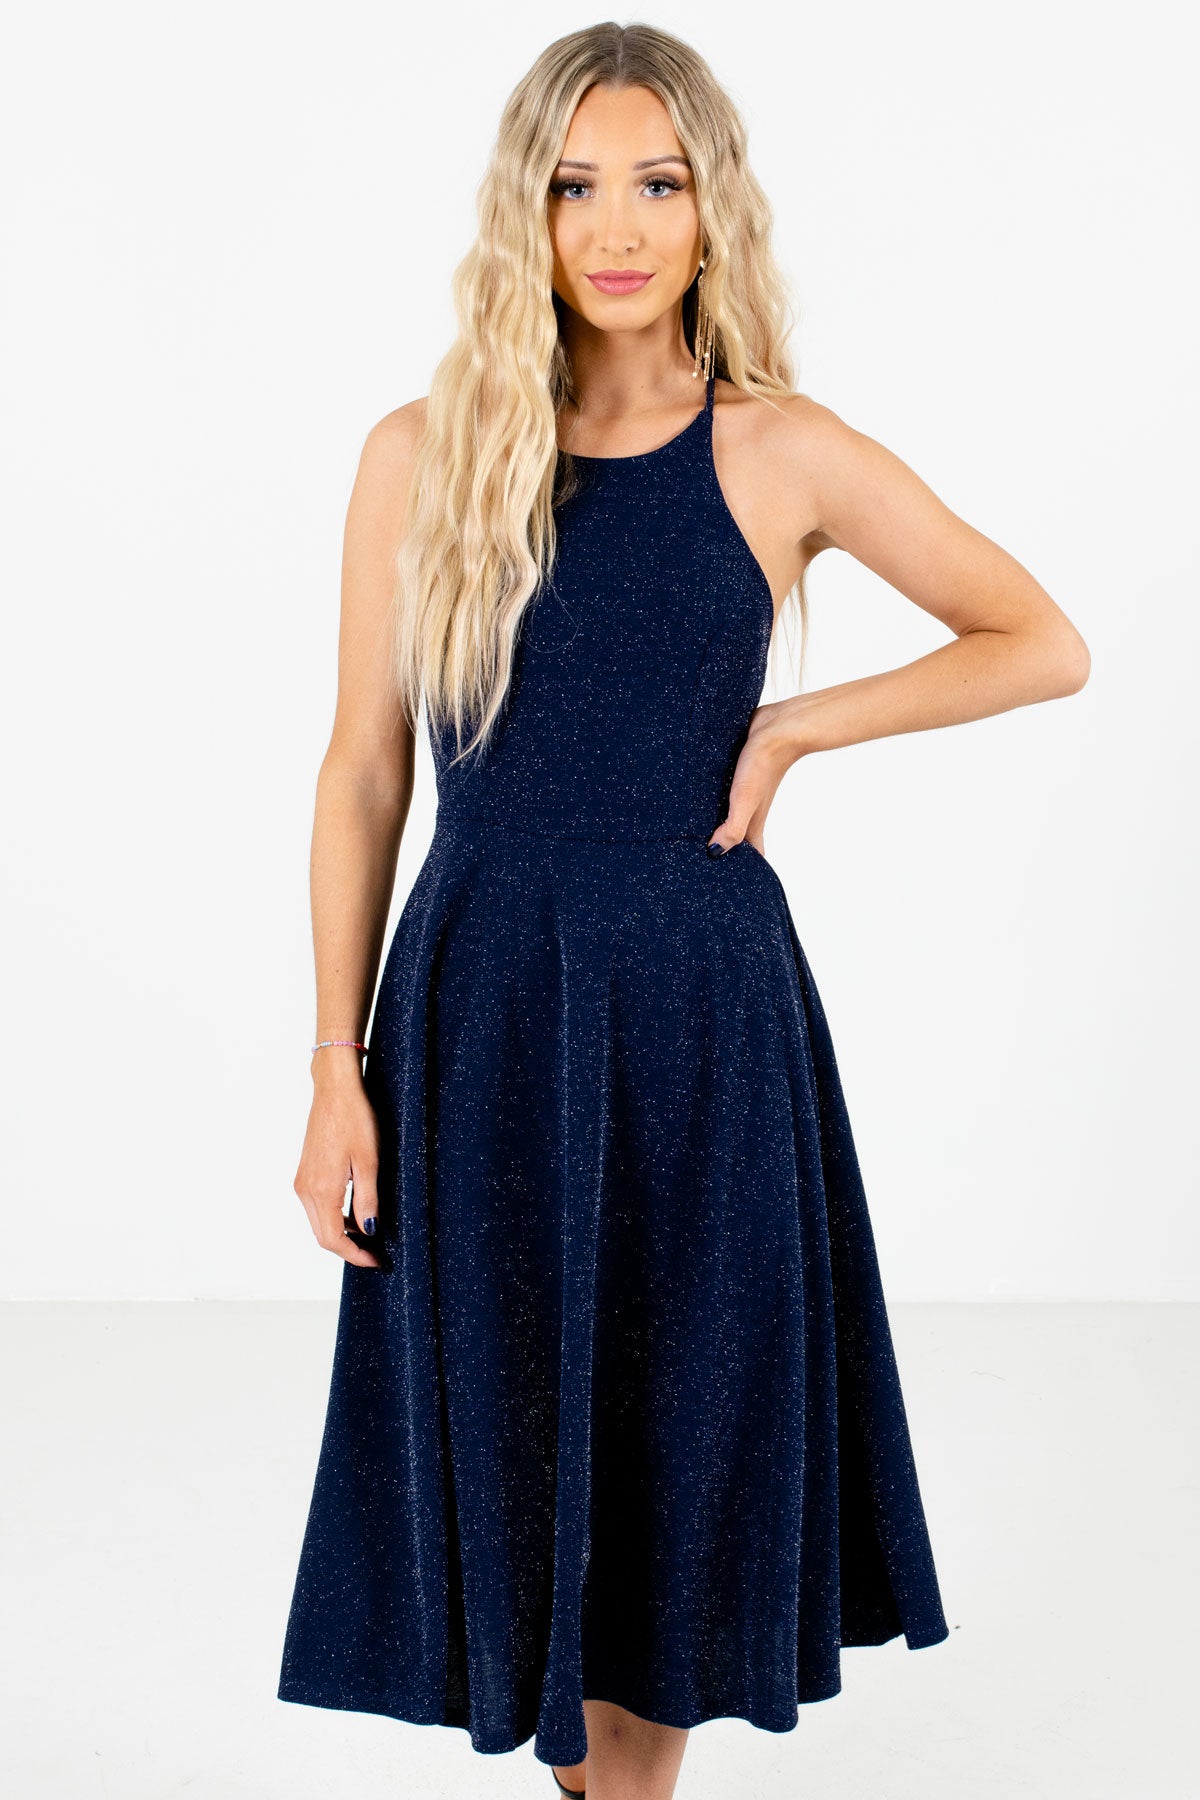 Navy Blue with Silver Glitter Accents Boutique Midi Dresses for Women